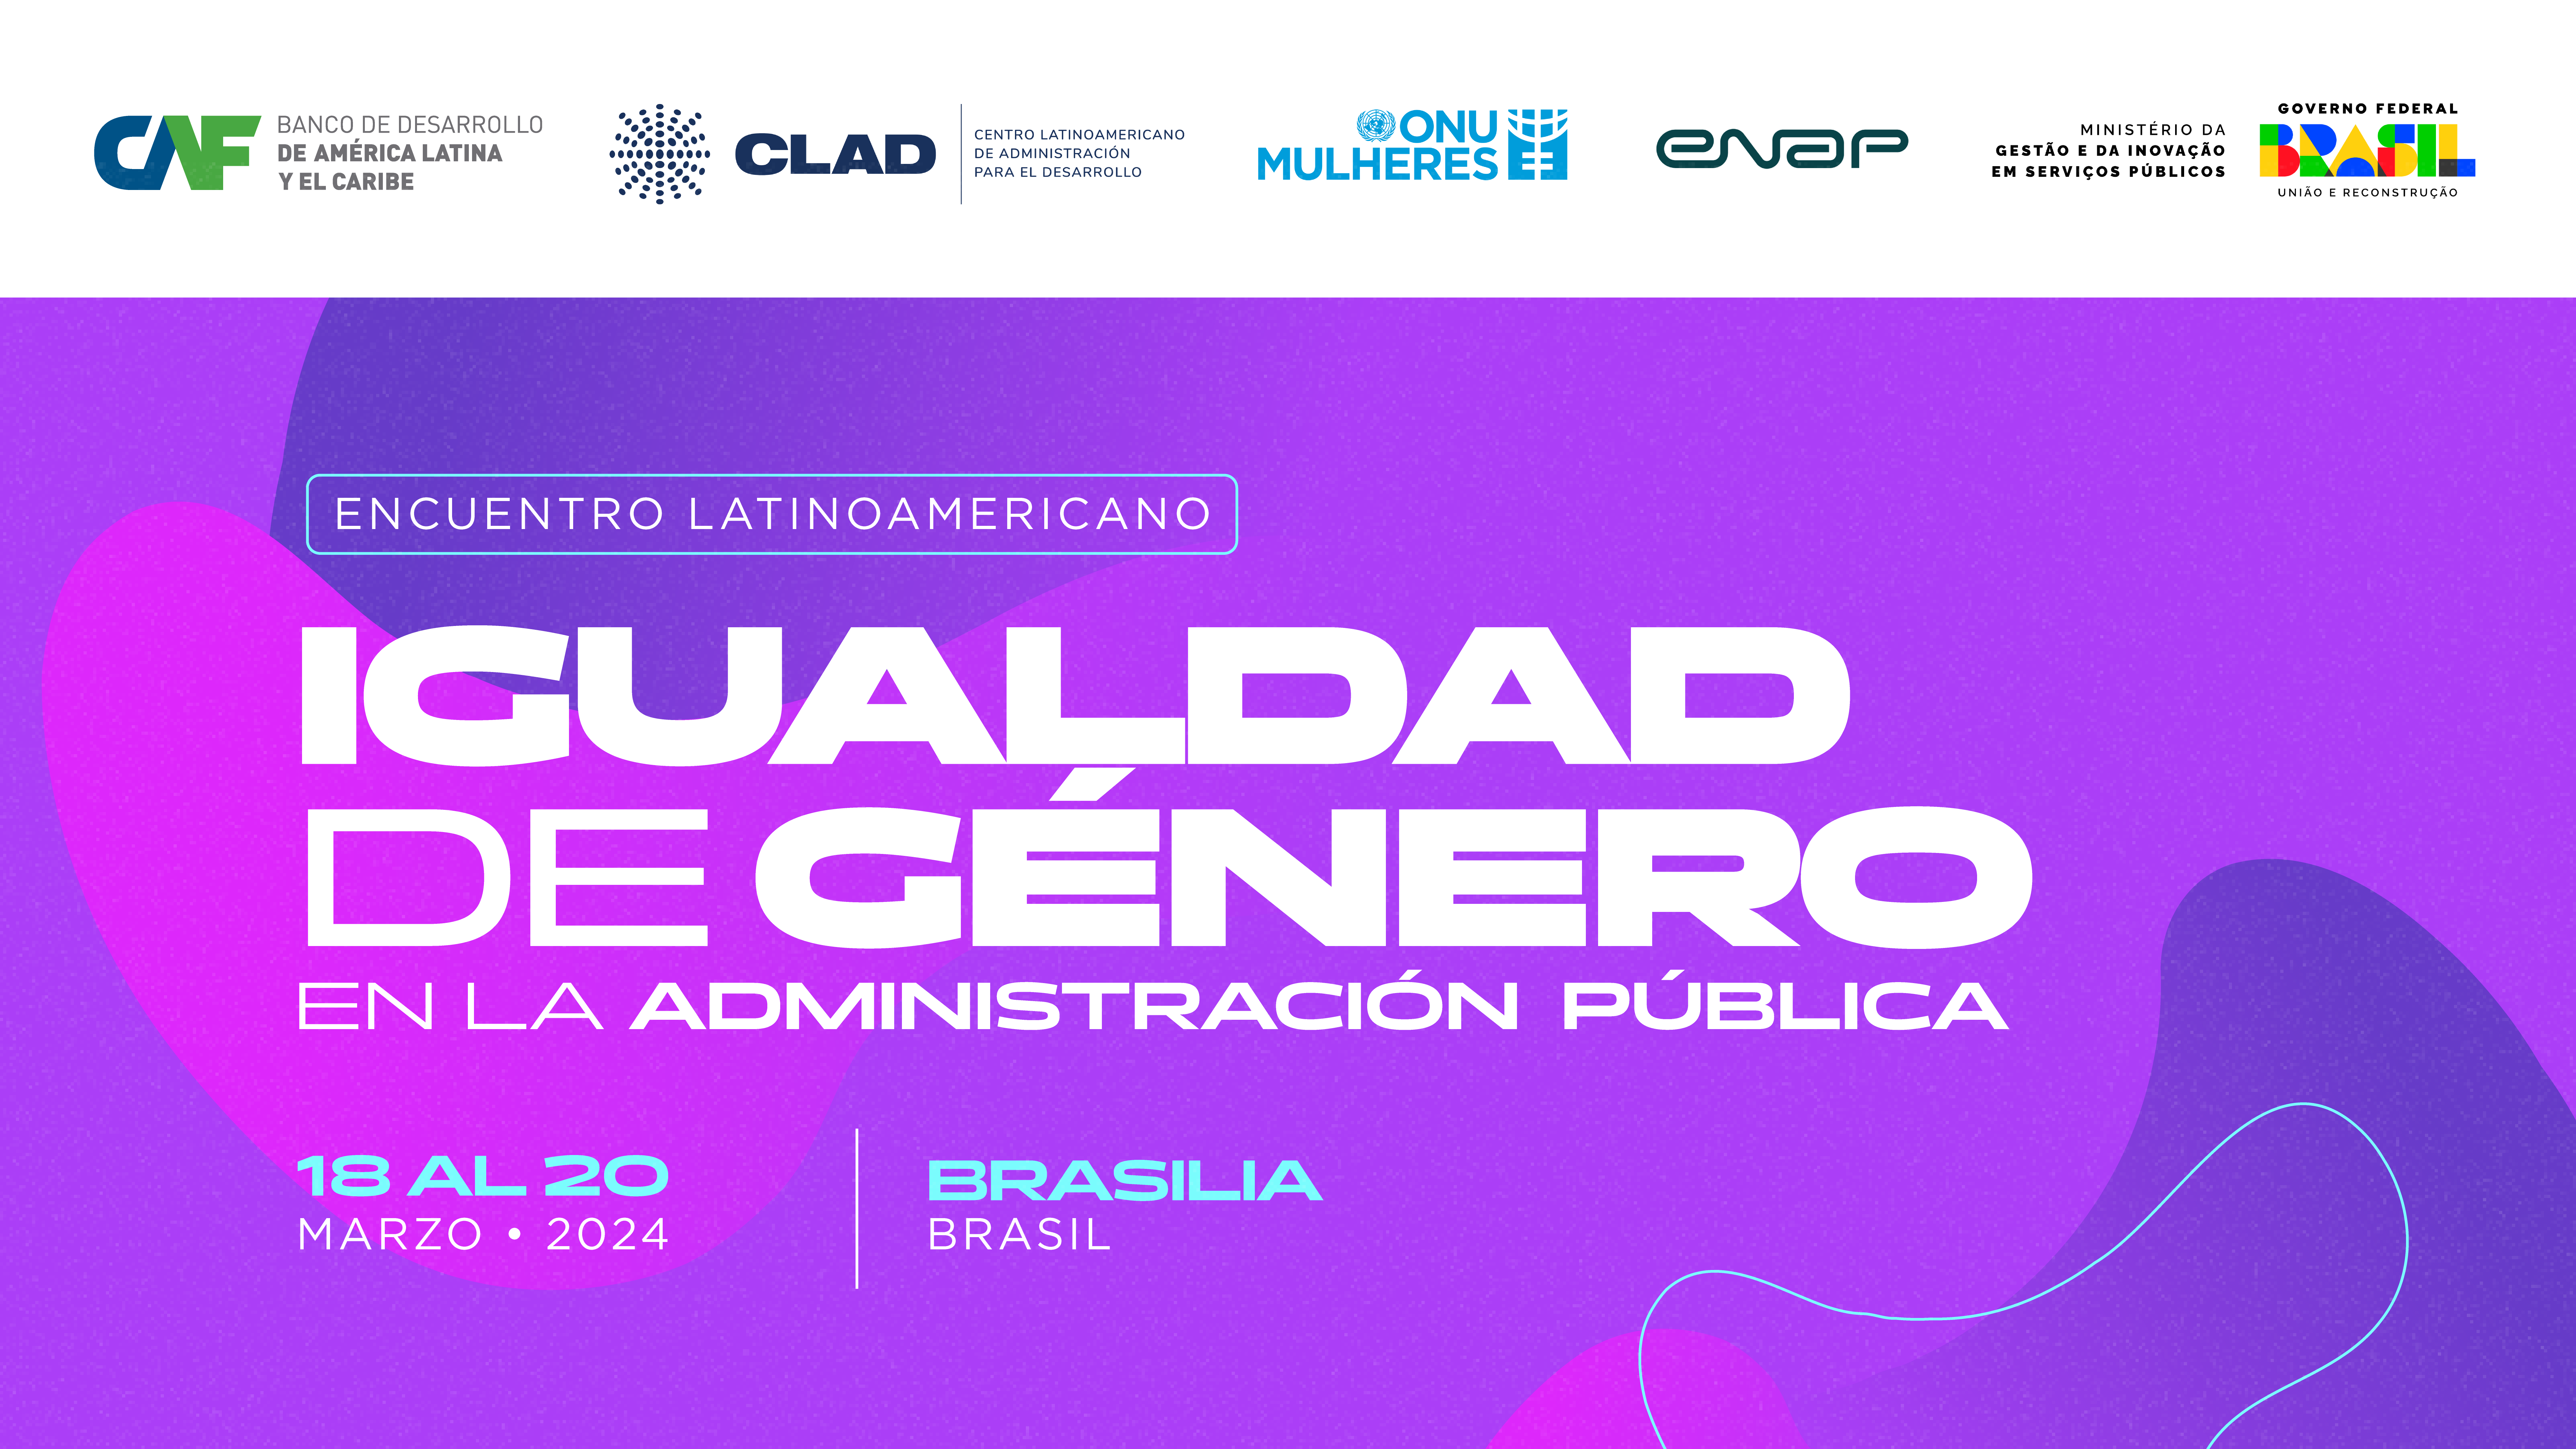 Meeting: Gender Equality in Public Administration in Latinamerica